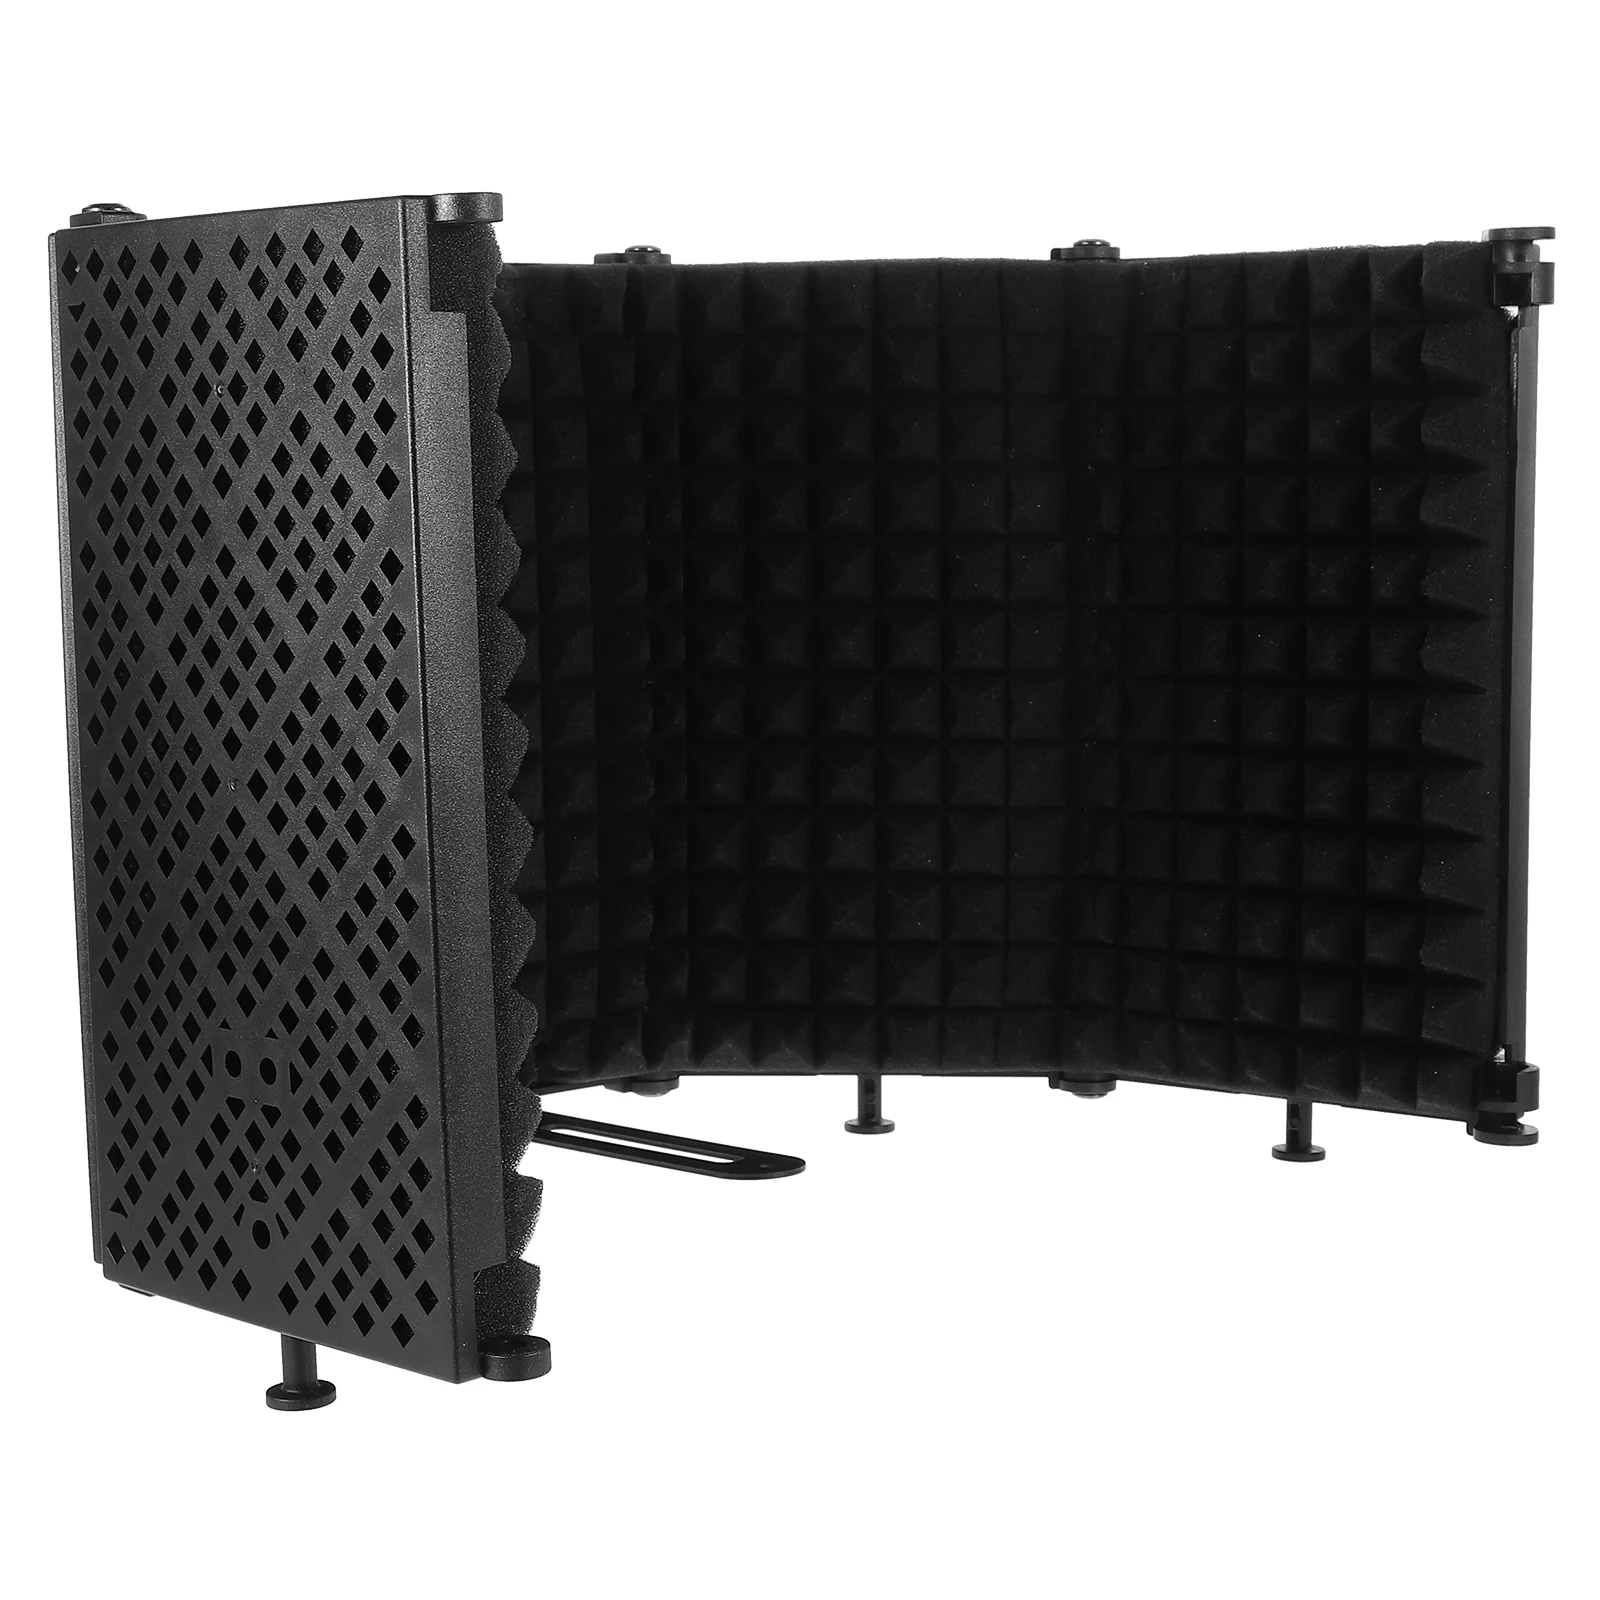 

Microphone Sound Shield Soundproof Cover Pad Absorbing Guard Screen Accessories Isolation